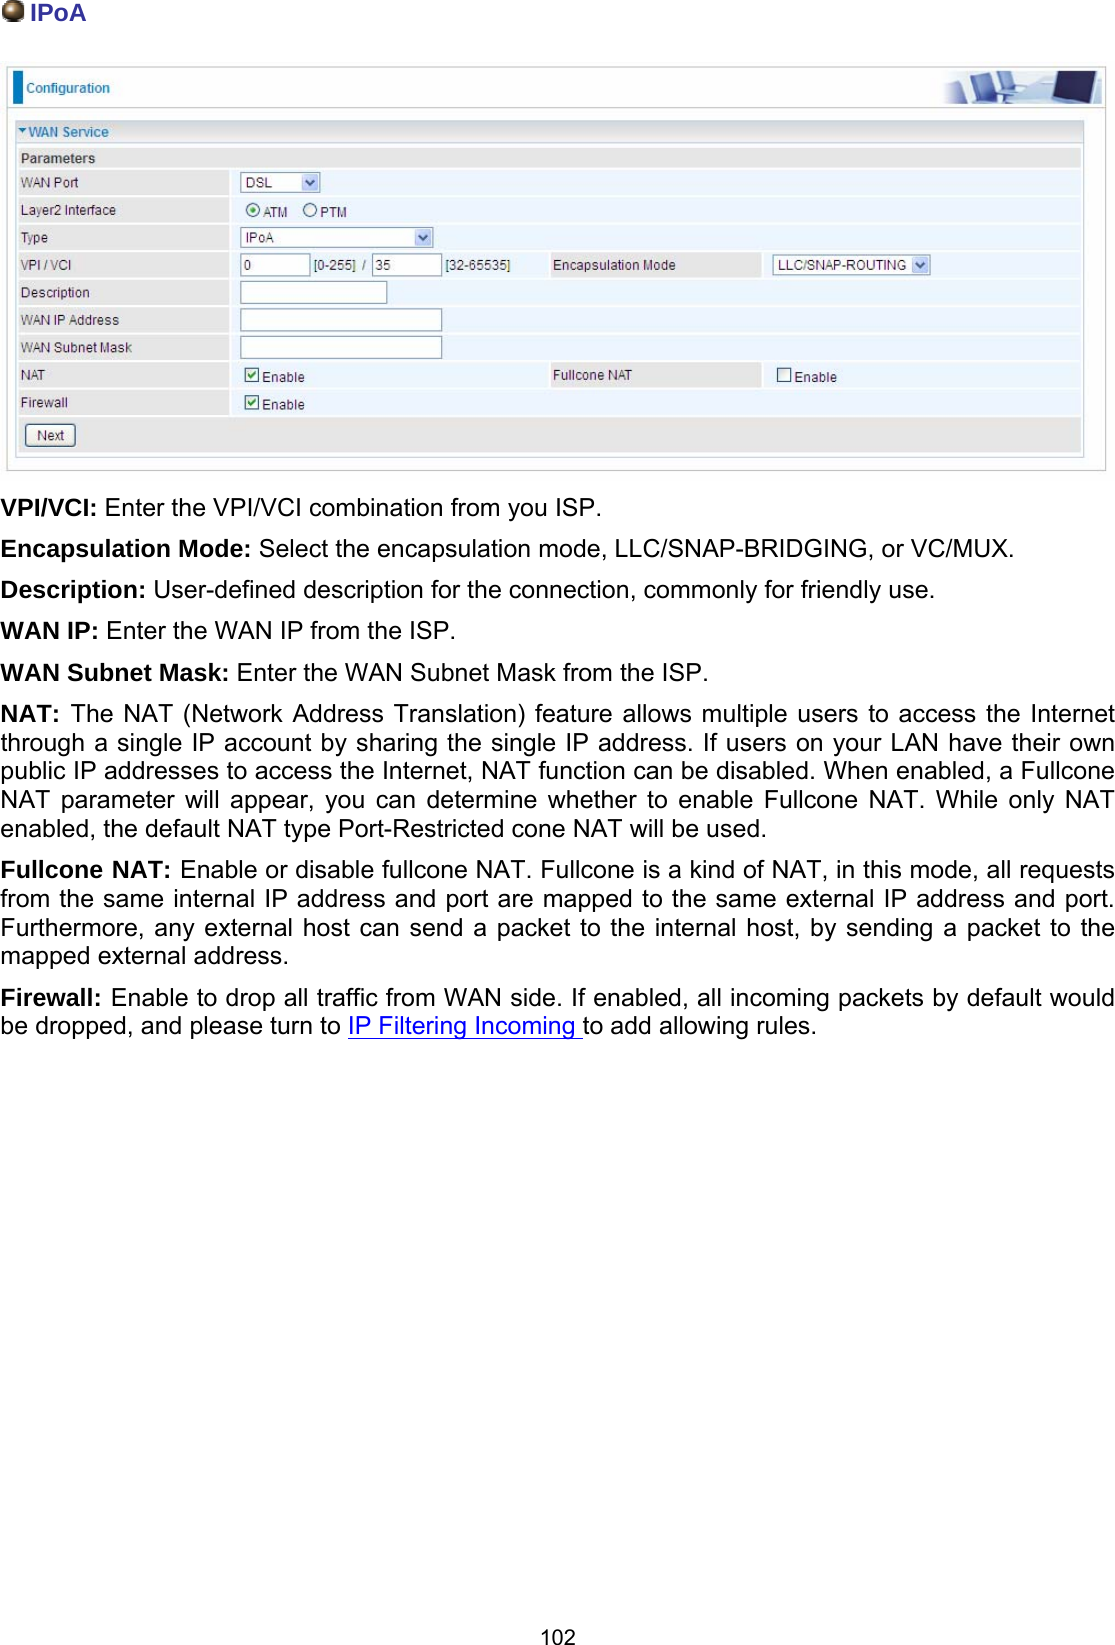  102  IPoA   VPI/VCI: Enter the VPI/VCI combination from you ISP.  Encapsulation Mode: Select the encapsulation mode, LLC/SNAP-BRIDGING, or VC/MUX. Description: User-defined description for the connection, commonly for friendly use. WAN IP: Enter the WAN IP from the ISP. WAN Subnet Mask: Enter the WAN Subnet Mask from the ISP. NAT: The NAT (Network Address Translation) feature allows multiple users to access the Internet through a single IP account by sharing the single IP address. If users on your LAN have their own public IP addresses to access the Internet, NAT function can be disabled. When enabled, a Fullcone NAT parameter will appear, you can determine whether to enable Fullcone NAT. While only NAT enabled, the default NAT type Port-Restricted cone NAT will be used.  Fullcone NAT: Enable or disable fullcone NAT. Fullcone is a kind of NAT, in this mode, all requests from the same internal IP address and port are mapped to the same external IP address and port. Furthermore, any external host can send a packet to the internal host, by sending a packet to the mapped external address. Firewall: Enable to drop all traffic from WAN side. If enabled, all incoming packets by default would be dropped, and please turn to IP Filtering Incoming to add allowing rules.                